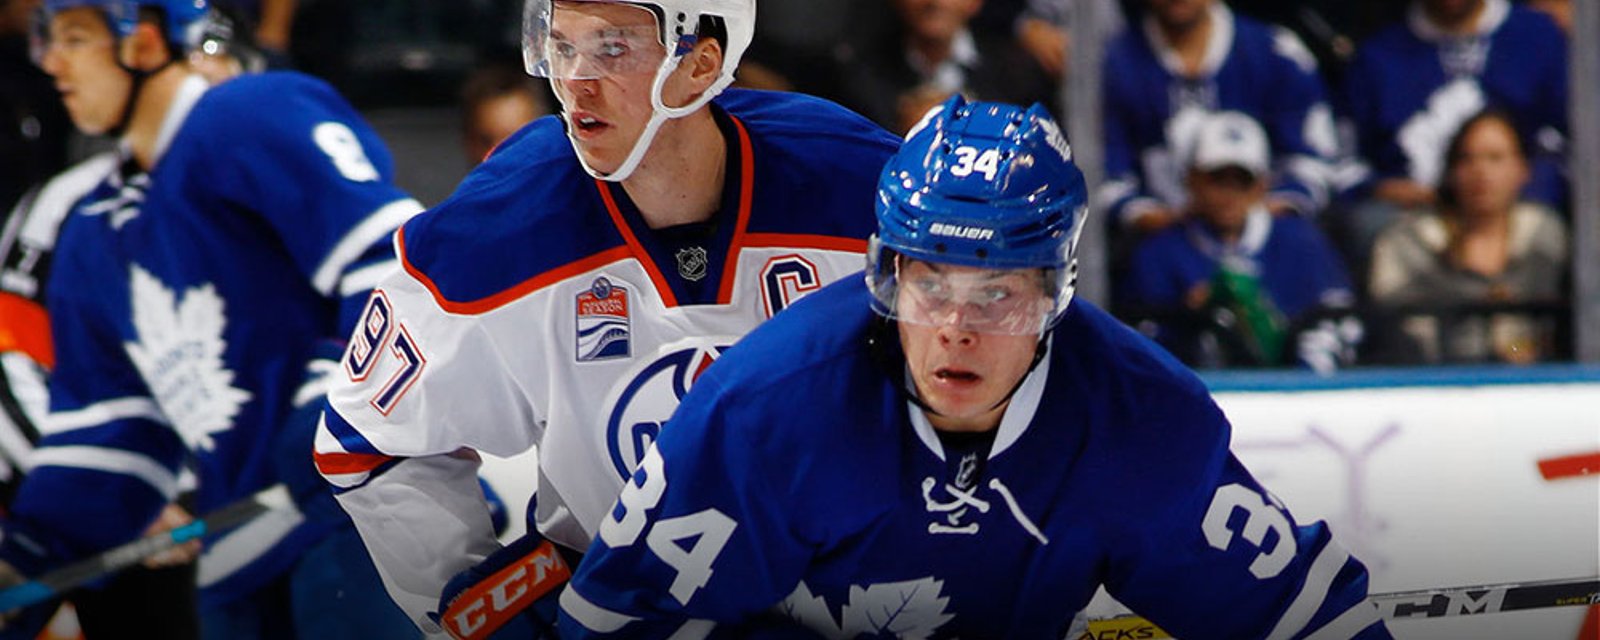 Who’s on the faster track? McDavid and the Oilers or Matthews and the Leafs?